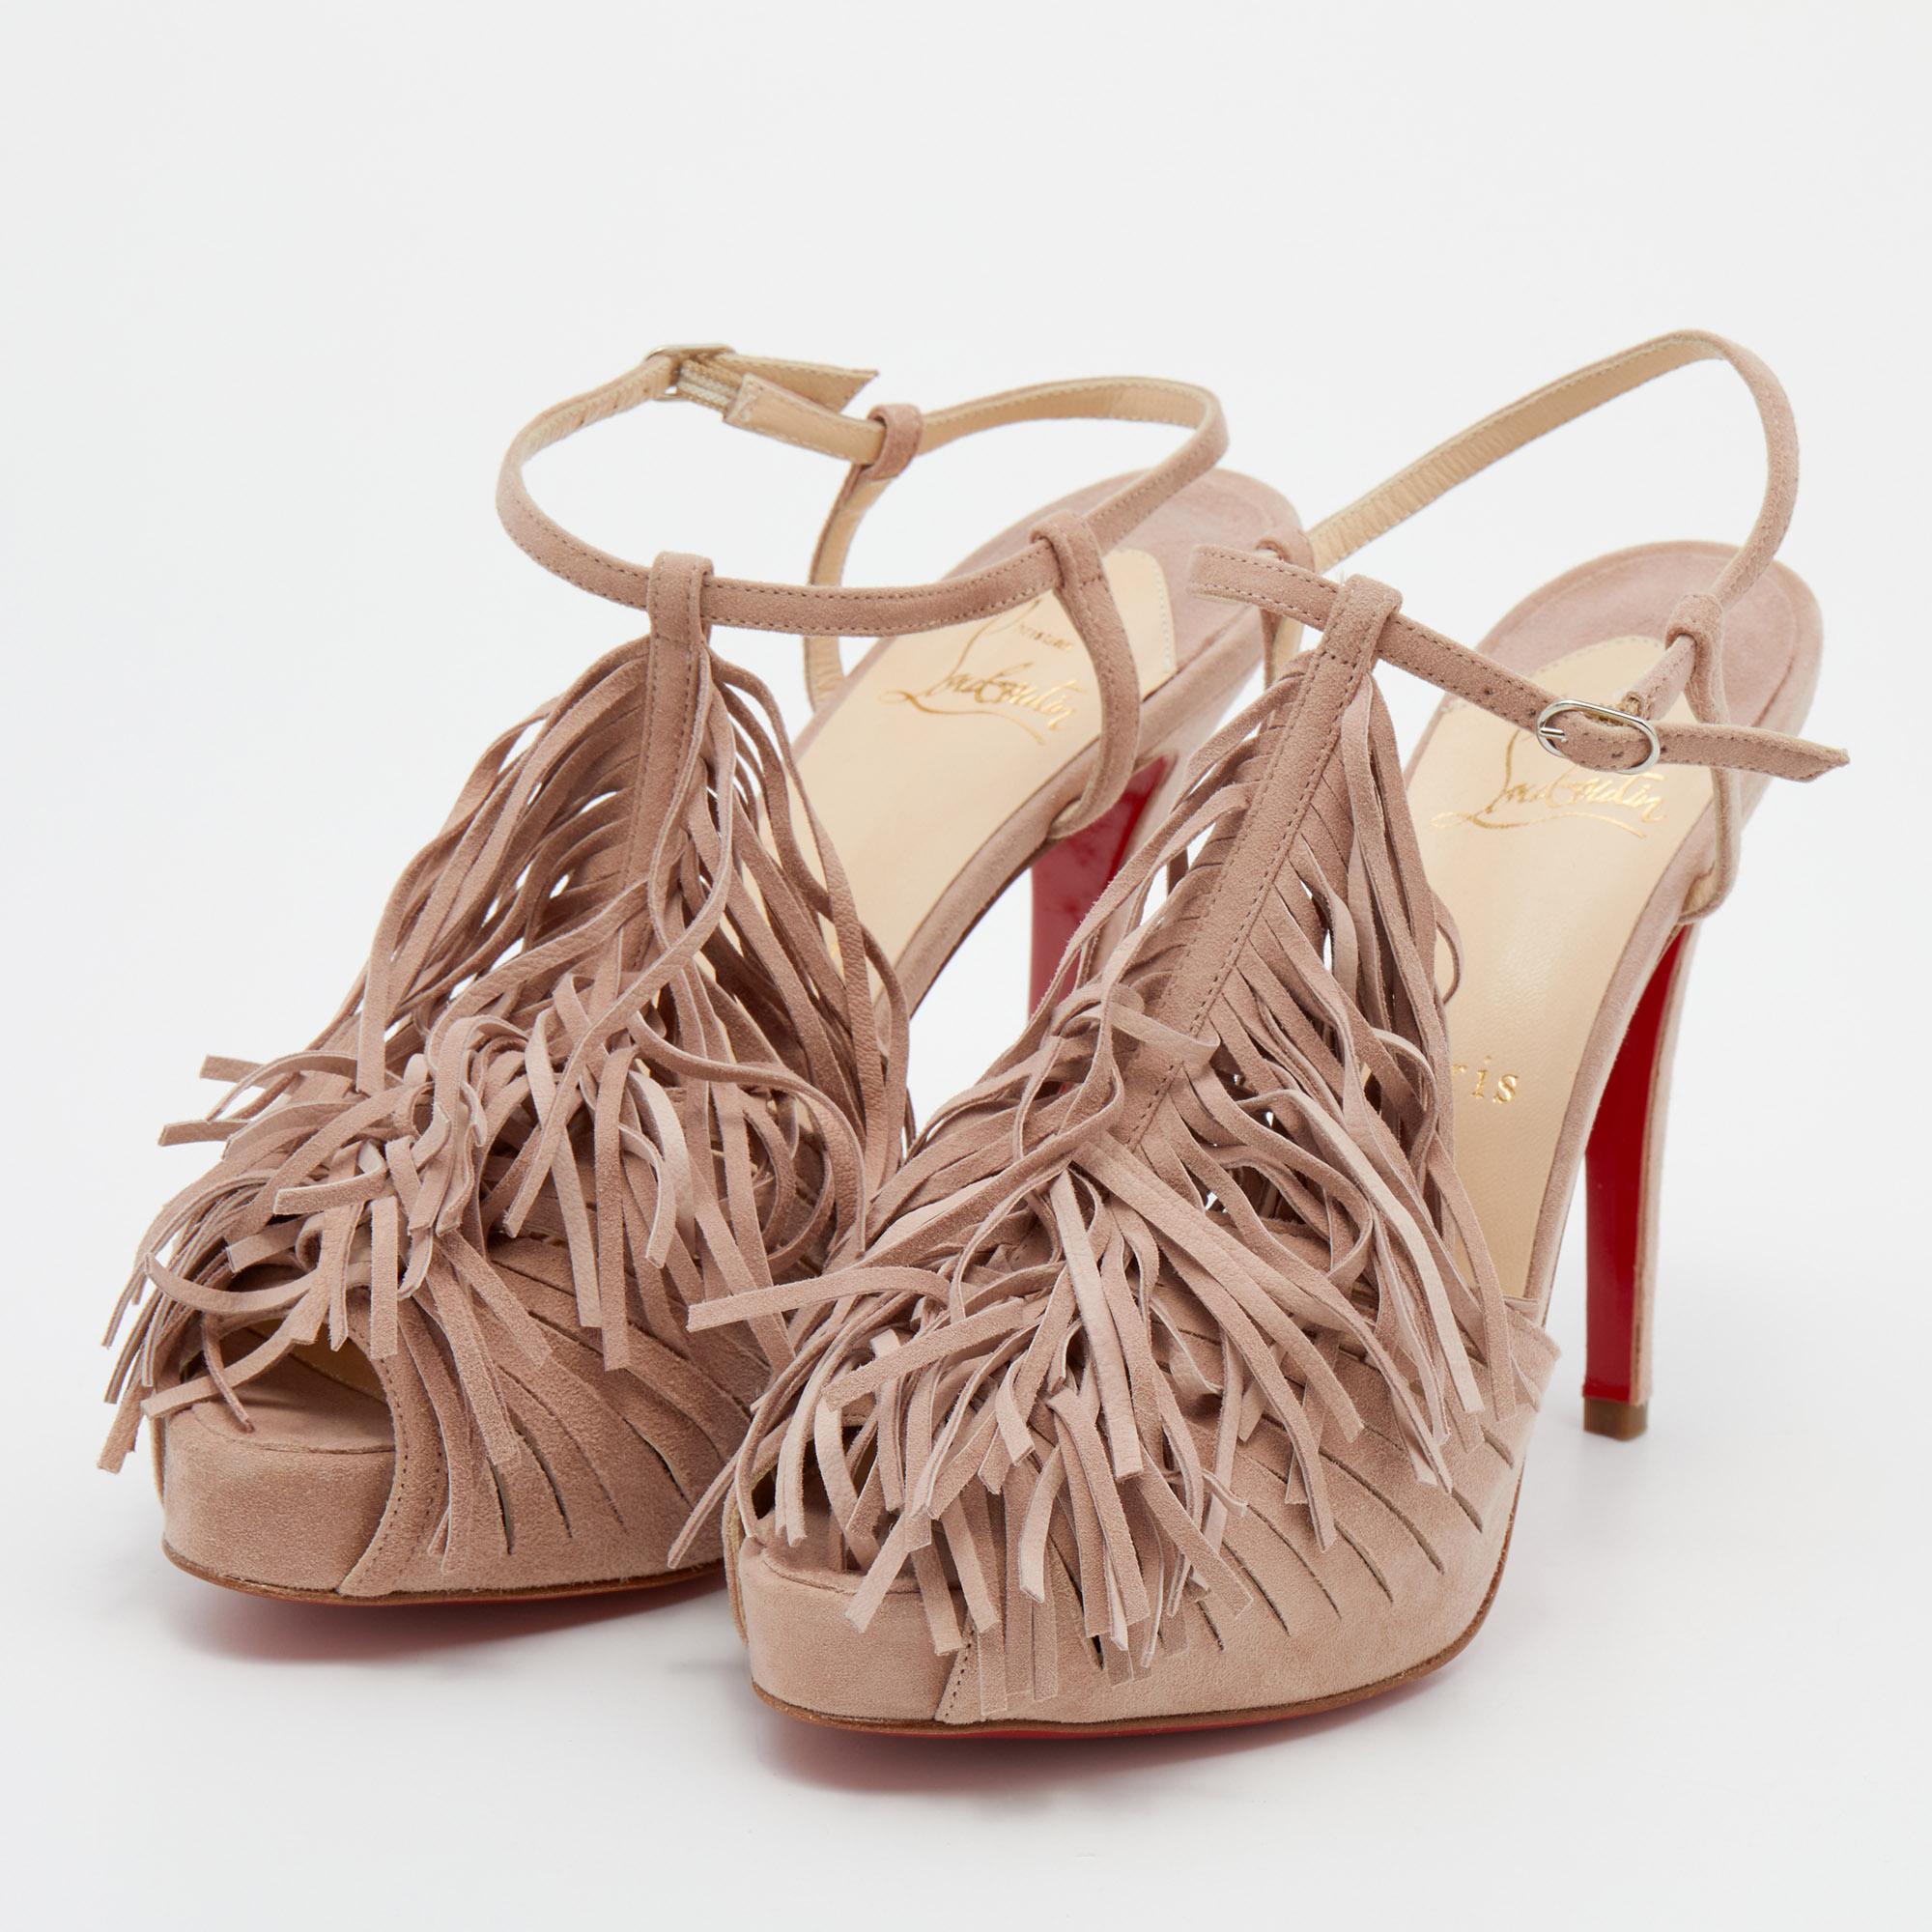 Christian Louboutin teaches us how to make a statement with these gorgeous T-strap sandals. Created using pink suede, the attractive shoes are enhanced with fringes on the uppers, sturdy platforms, and 12 cm heels.

